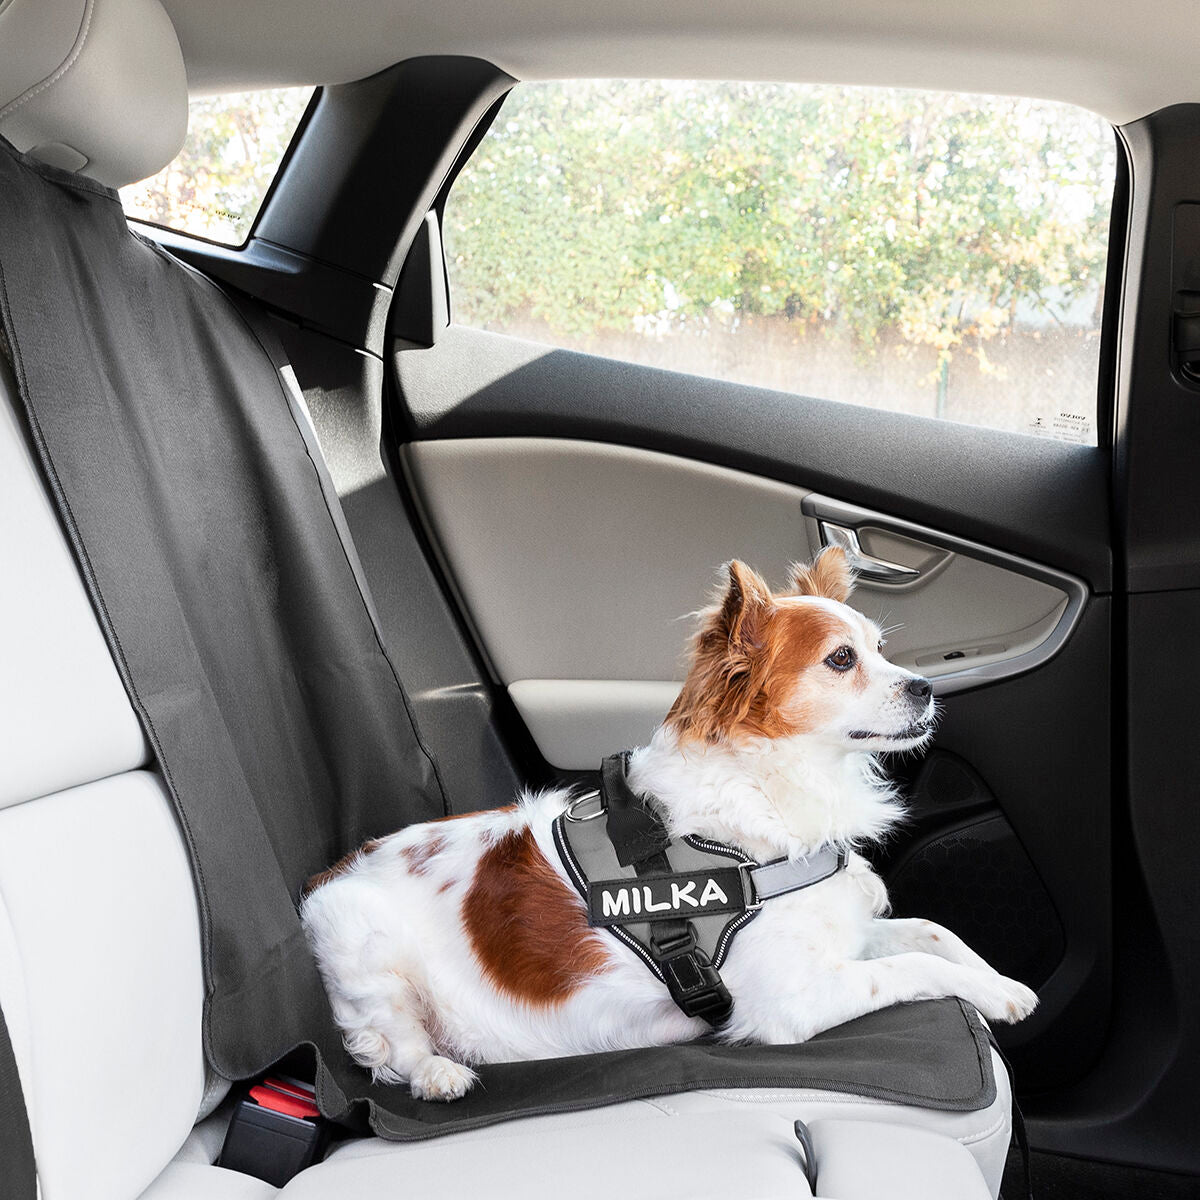 Individual Protective Car Seat Cover for Pets KabaPet InnovaGoods